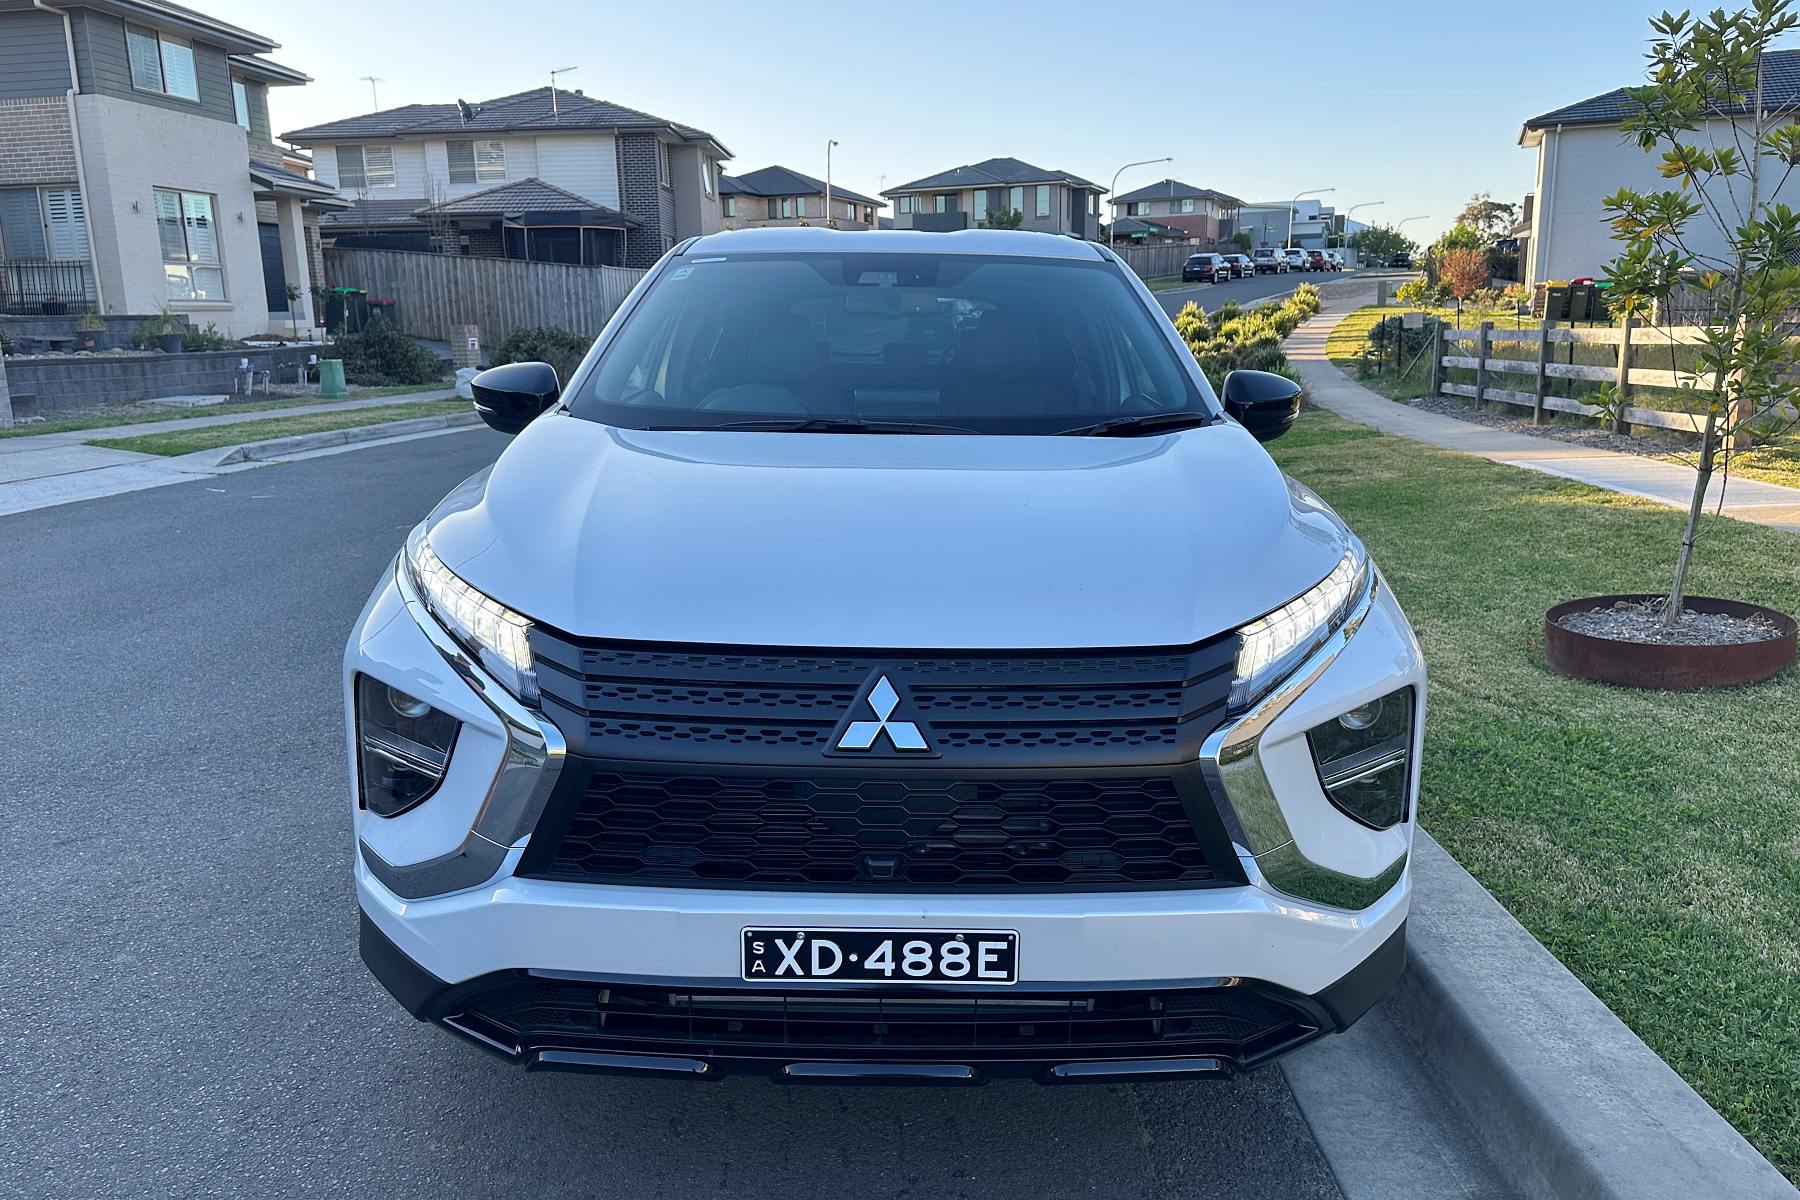 Mitsubishi Eclipse Cross LS Black Edition front grill and bonnet